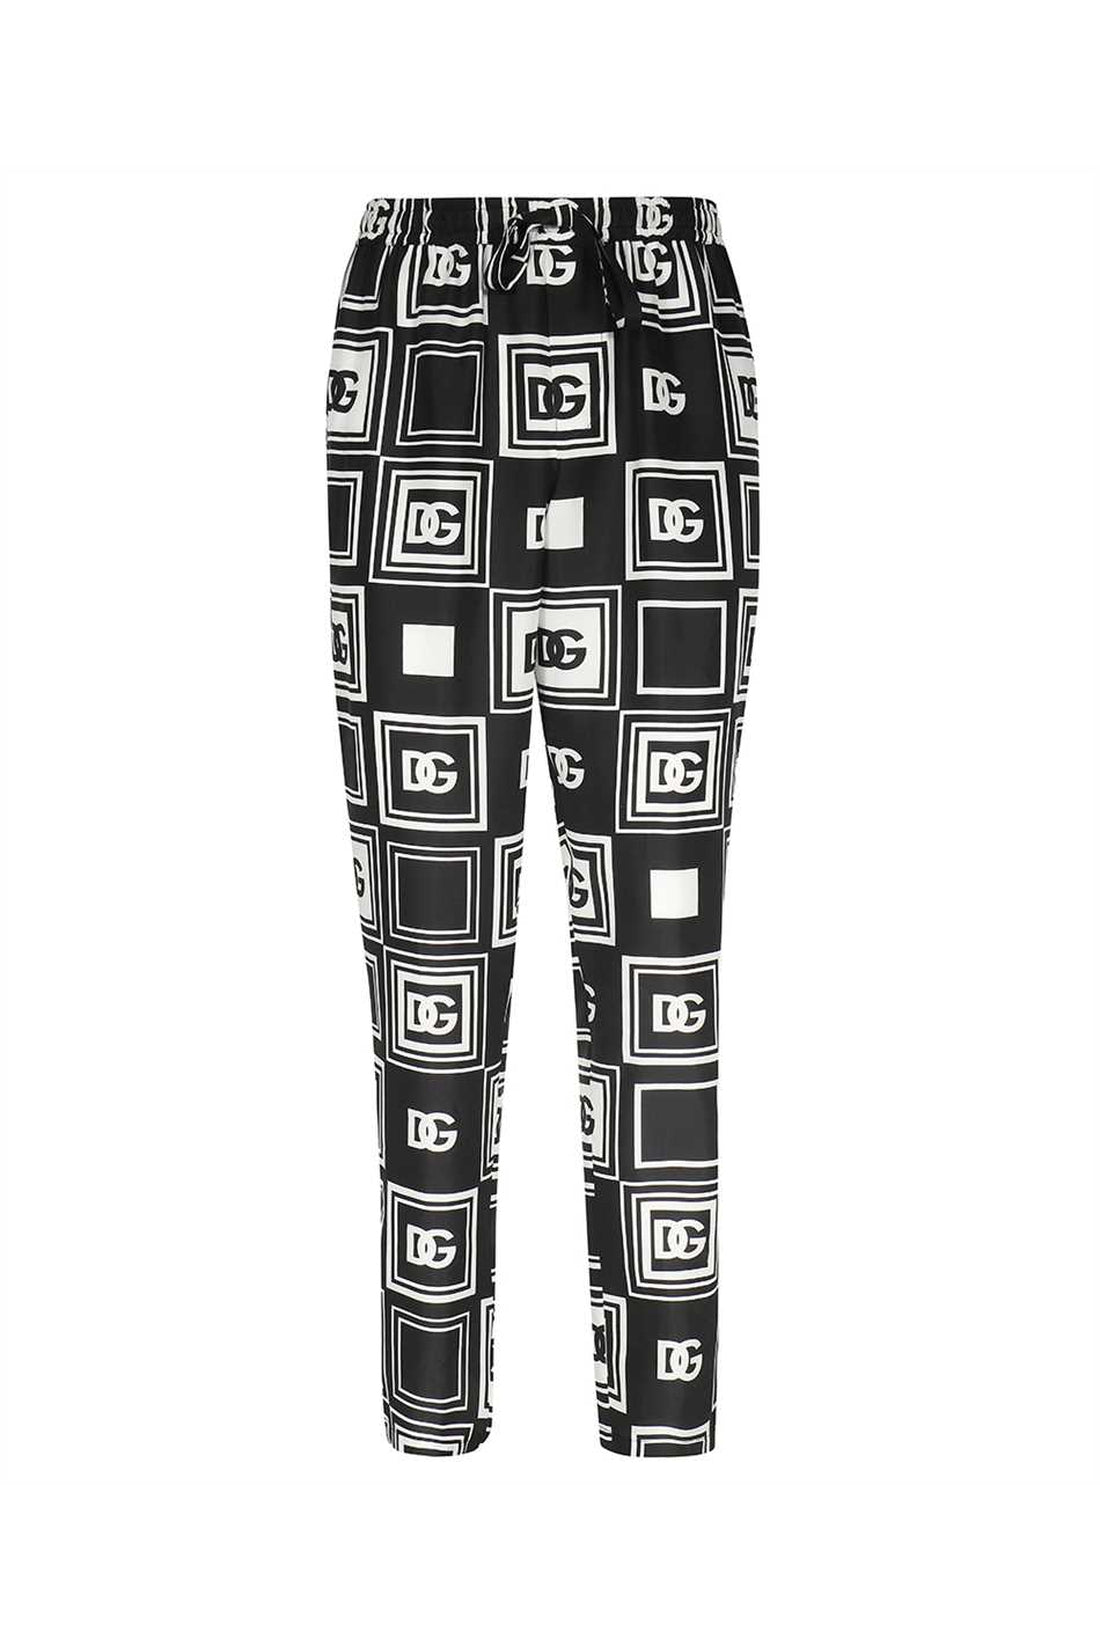 Dolce & Gabbana-OUTLET-SALE-Printed silk jogging trousers-ARCHIVIST